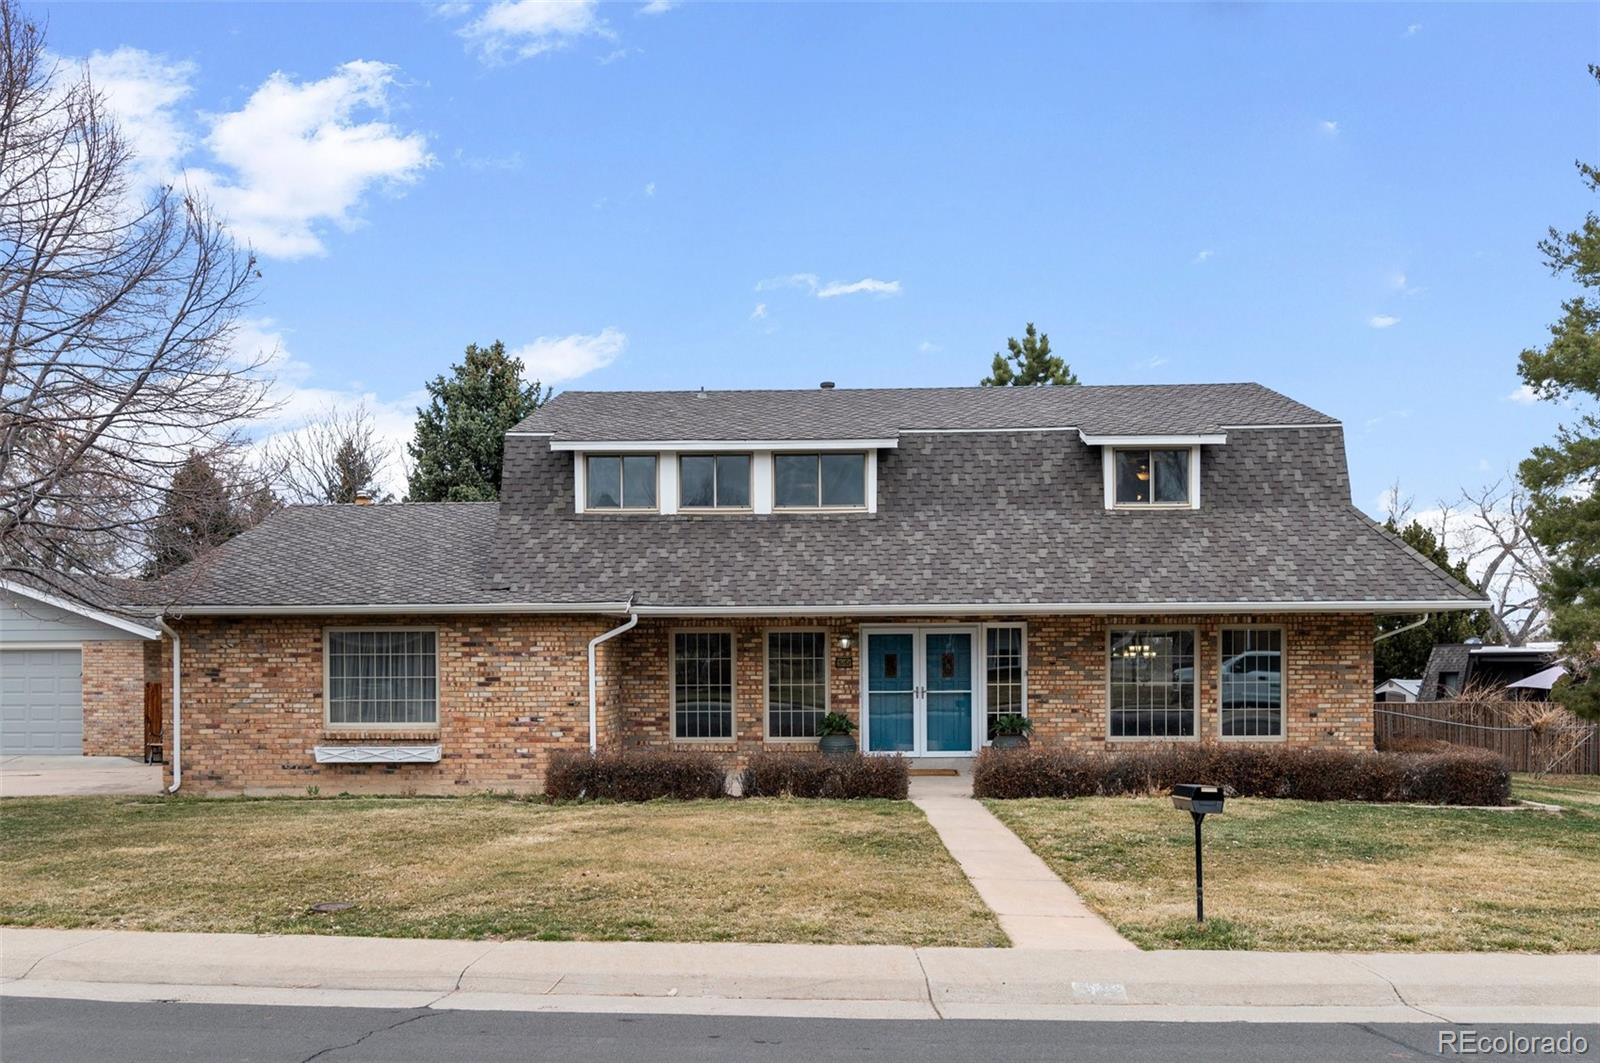 Report Image for 5161 W Plymouth Drive,Littleton, Colorado